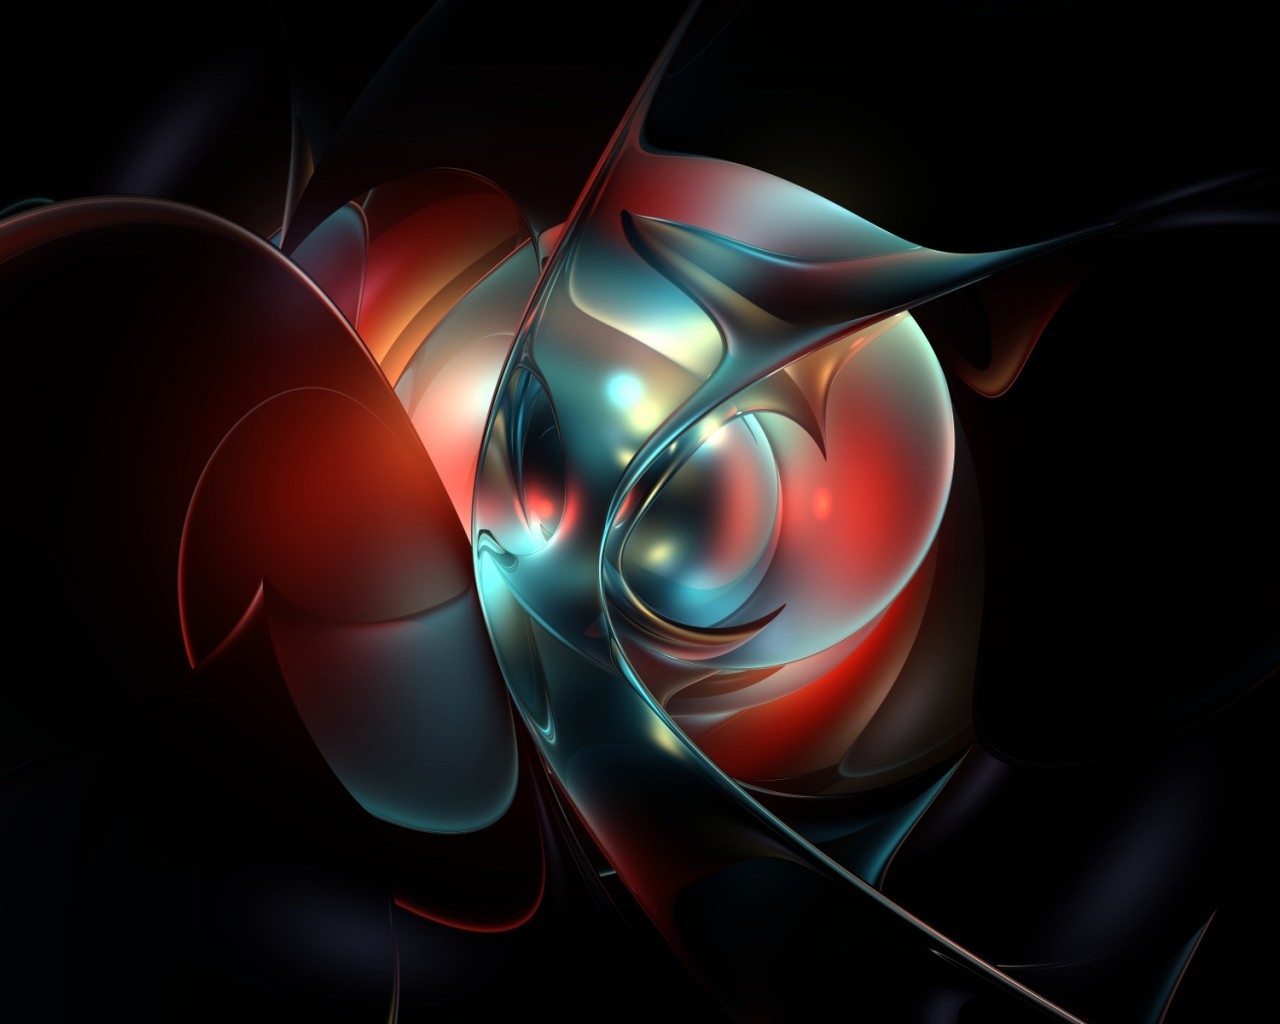 Abstract Geometric Shapes for 1280 x 1024 resolution